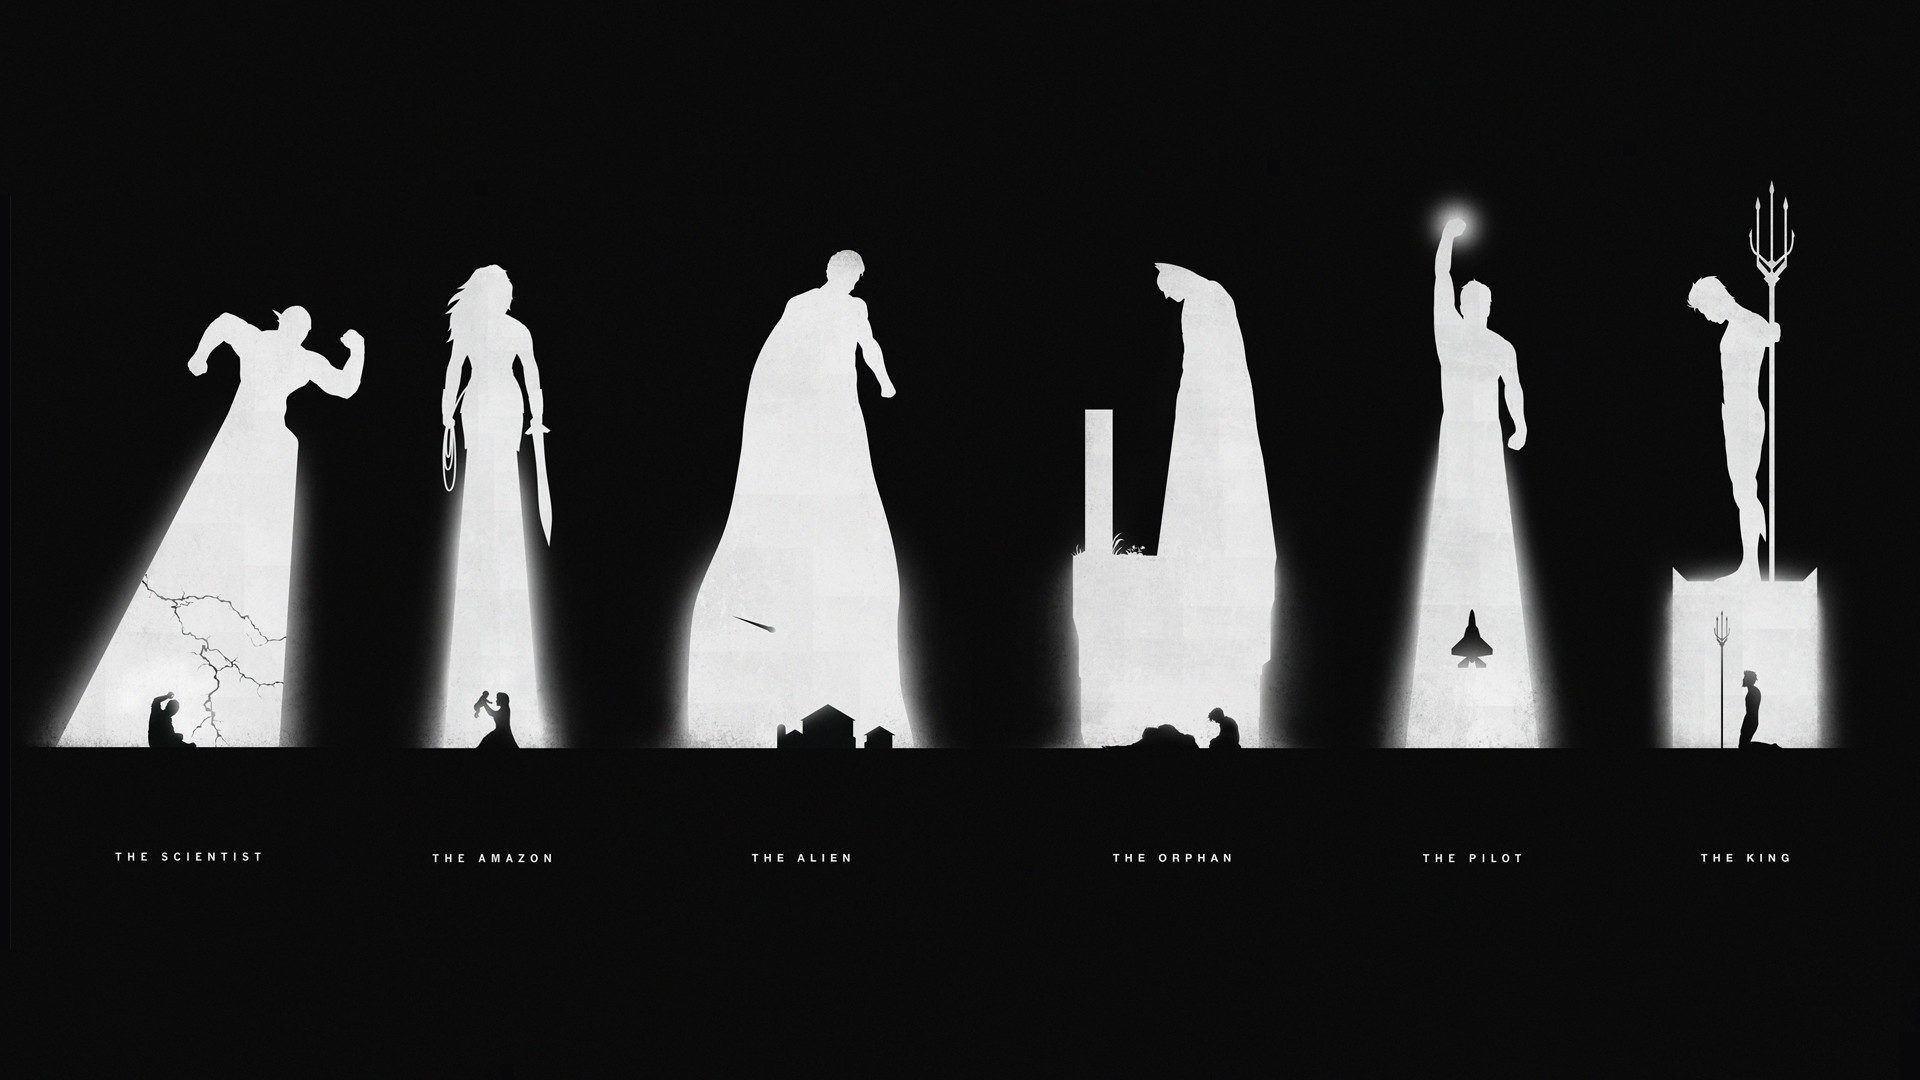 1920x1080 ... Justice League Hd Wallpapers. Download